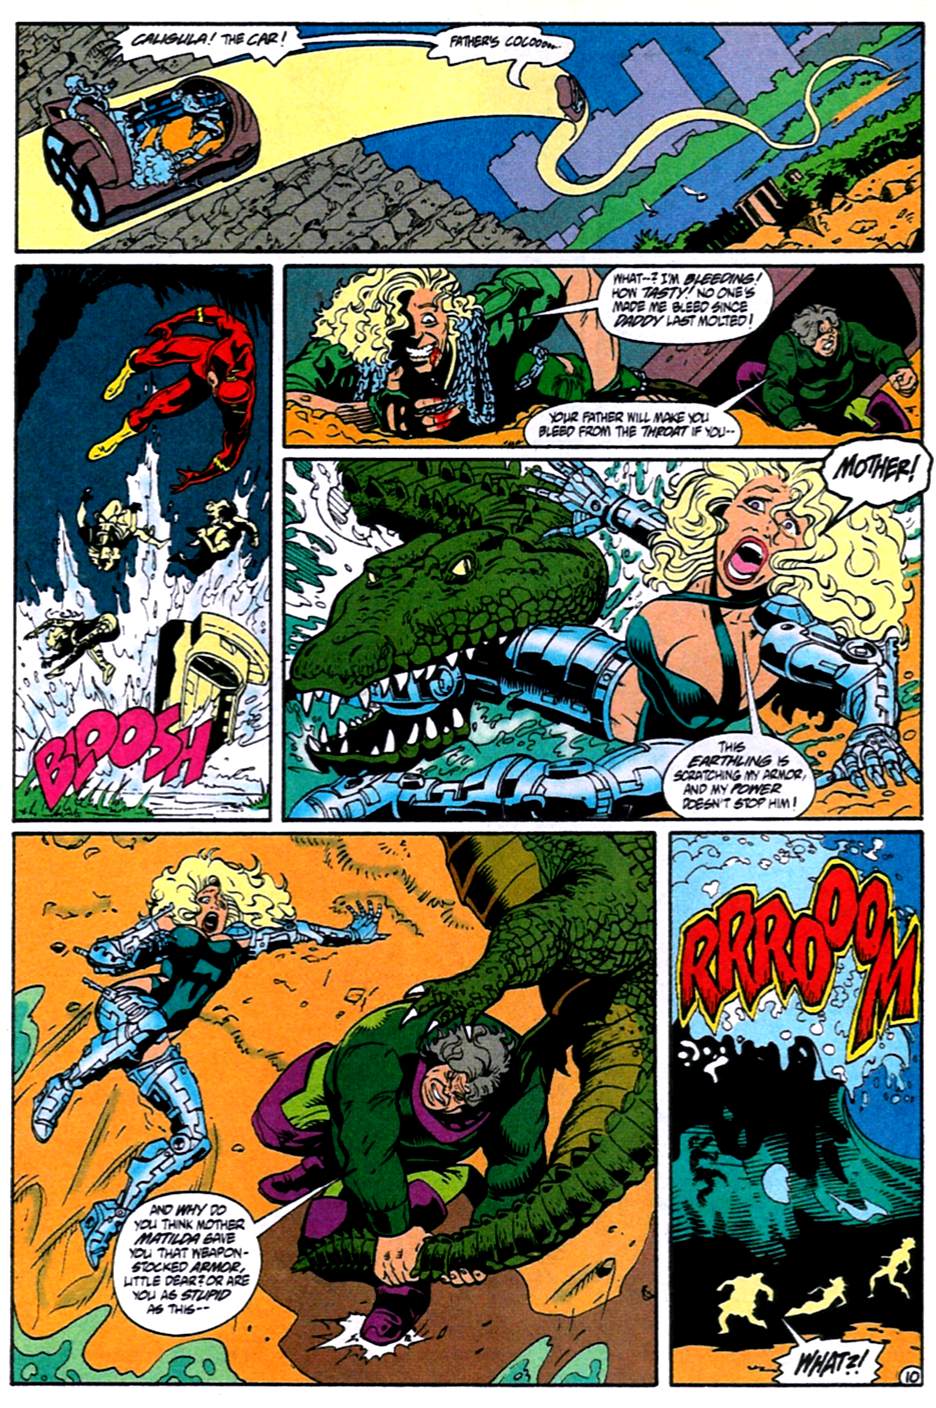 Justice League International (1993) 61 Page 10